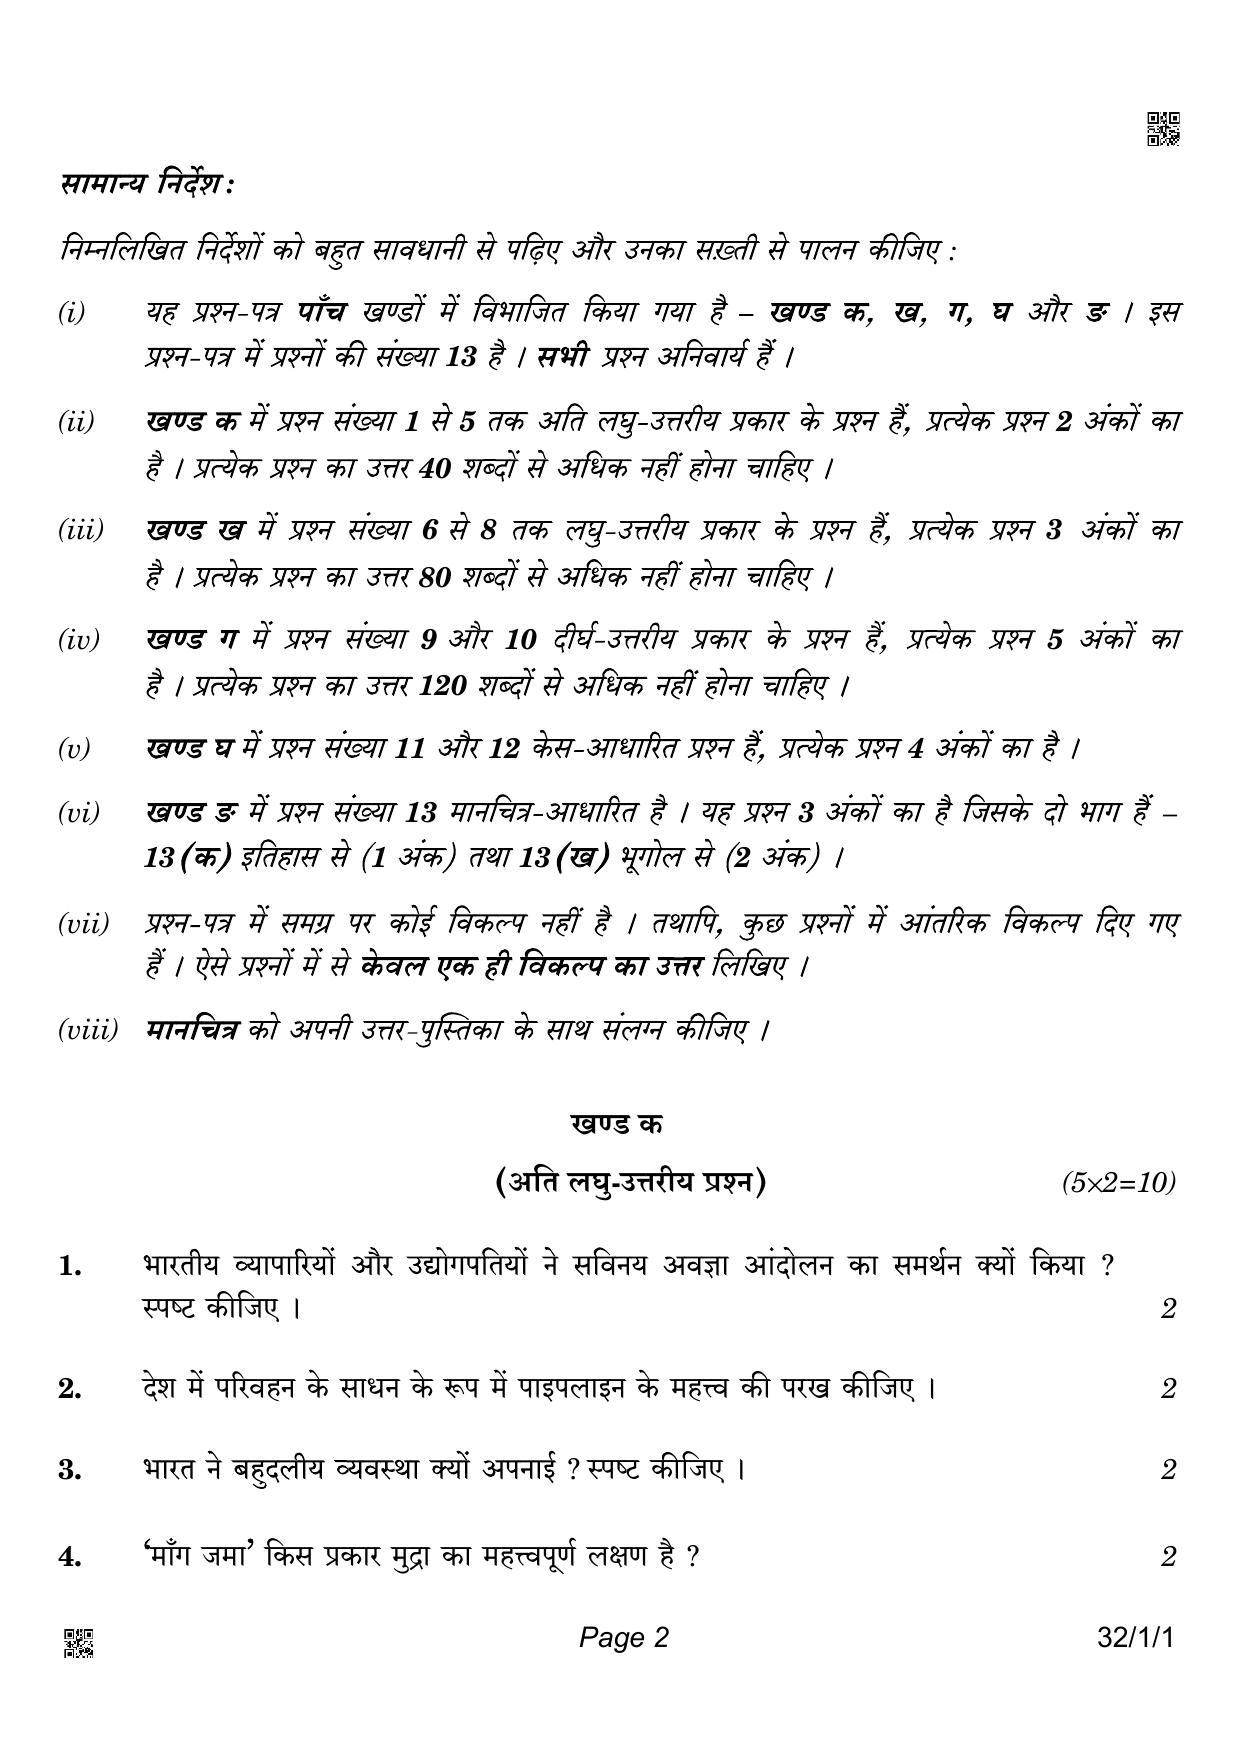 CBSE Class 10 32-1-1 Social Science 2022 Question Paper - Page 2